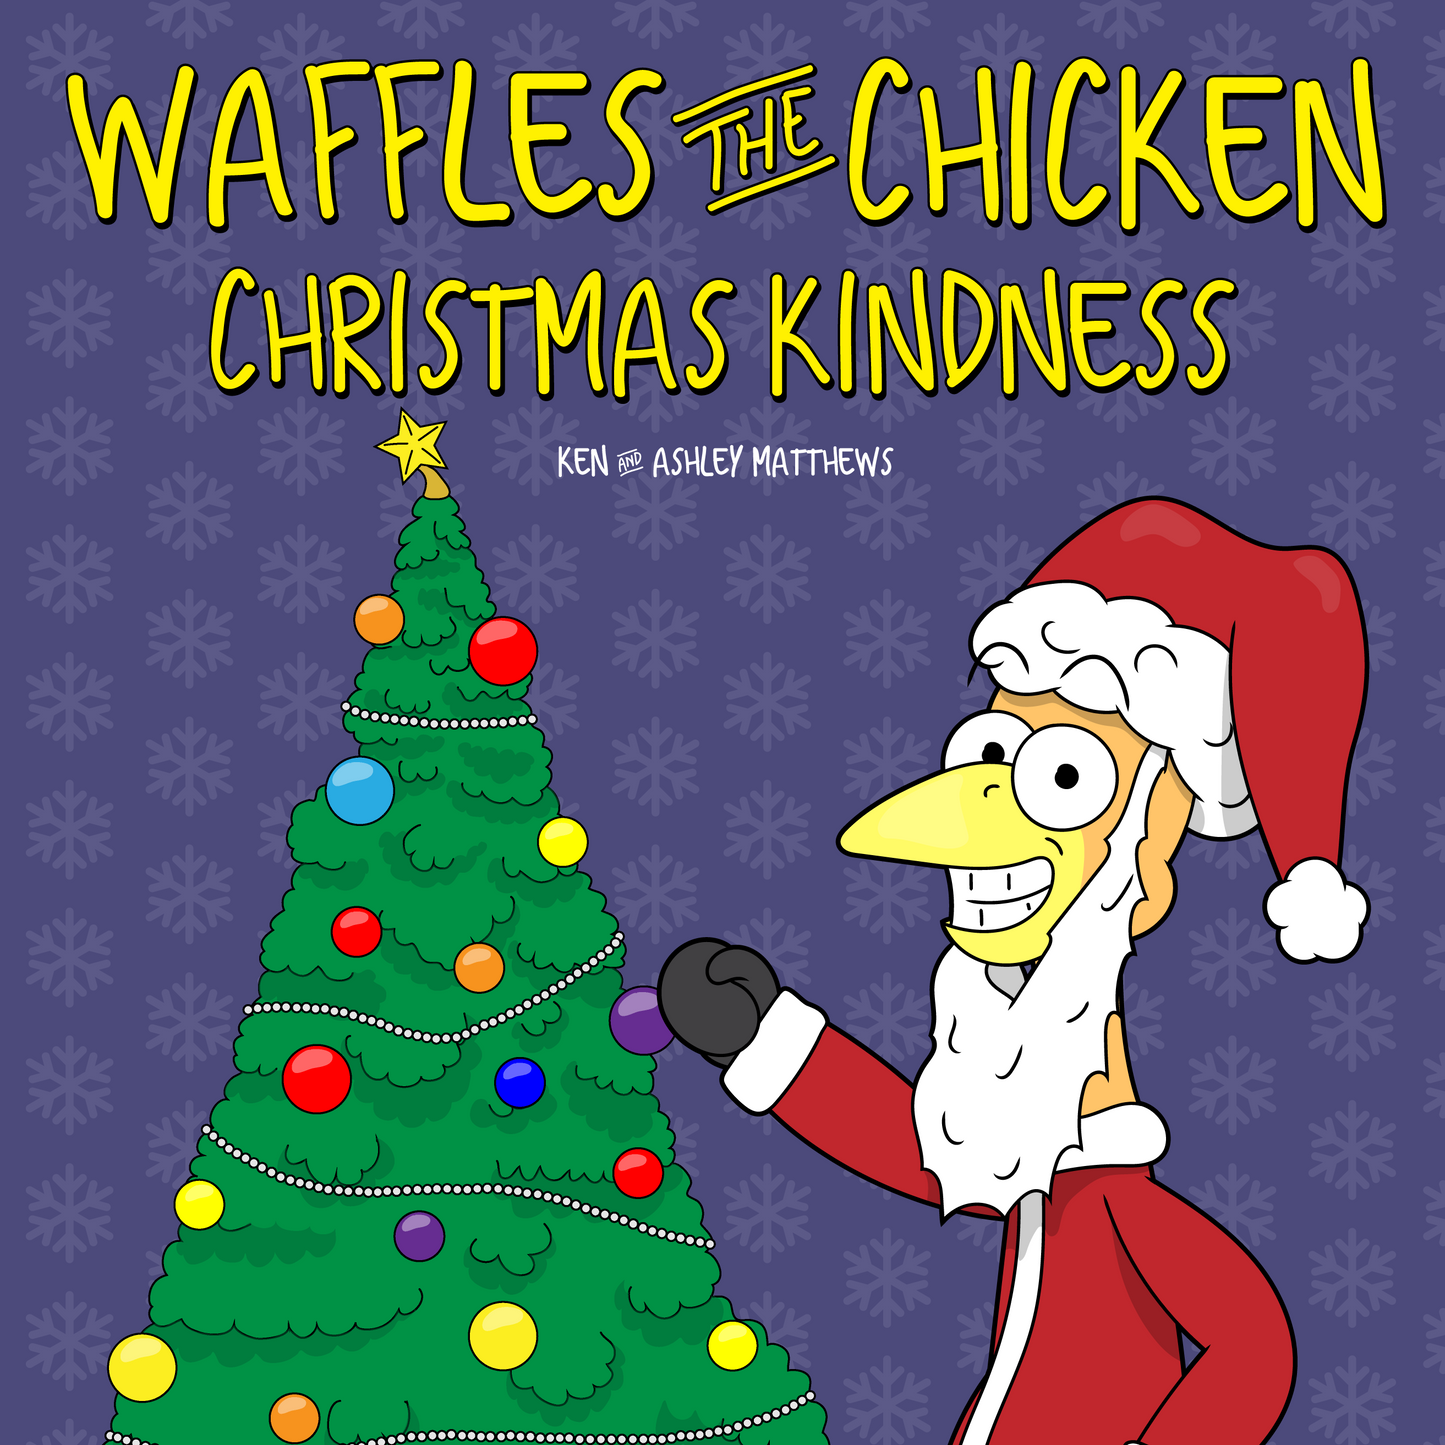 Waffles the Chicken Christmas Kindness